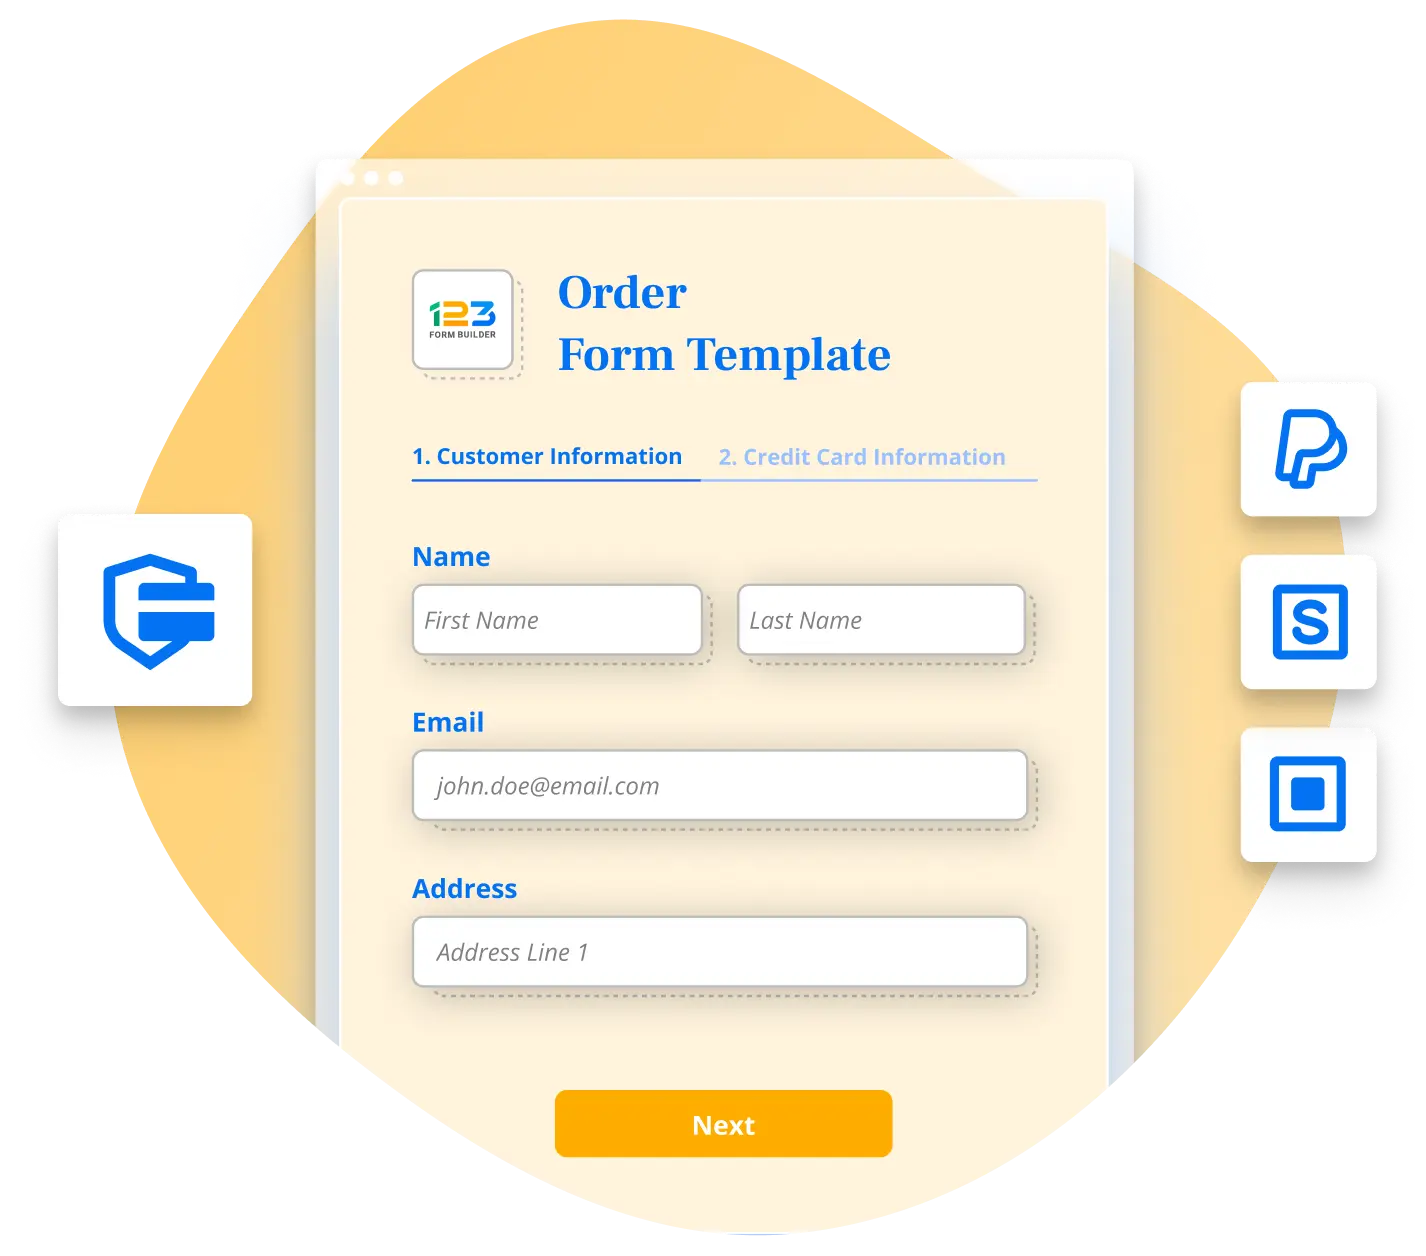 Image showing an order form template payment options